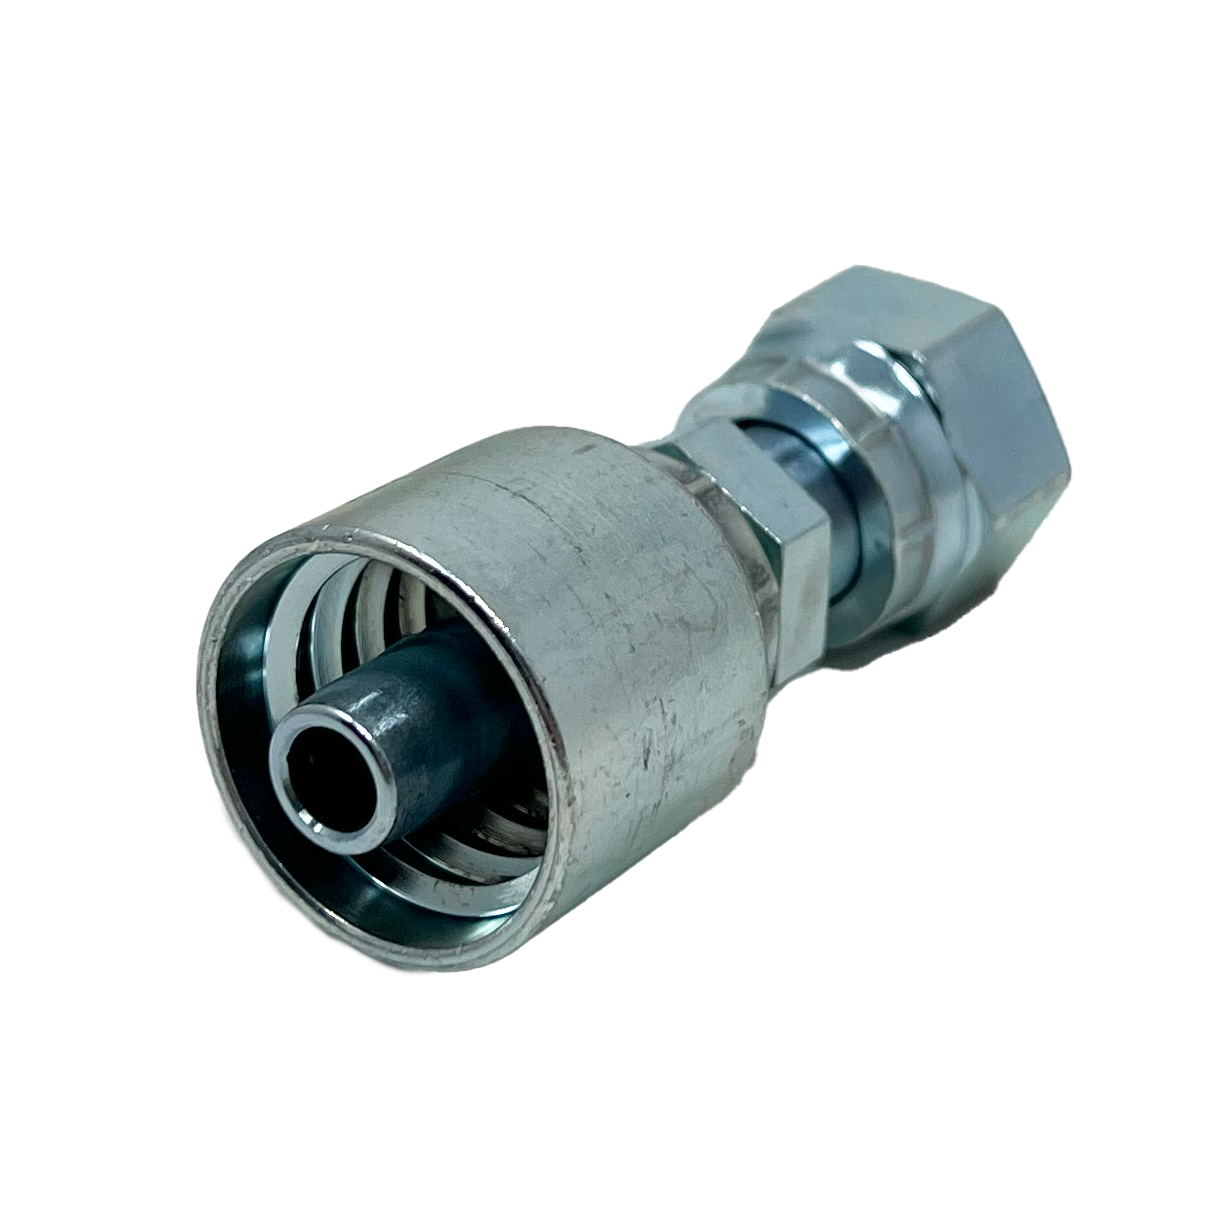 B2-OFFX-0408: Continental Hose Fitting, 0.25 (1/4") Hose ID x 13/16-16 Female ORFS, Straight Swivel Connection